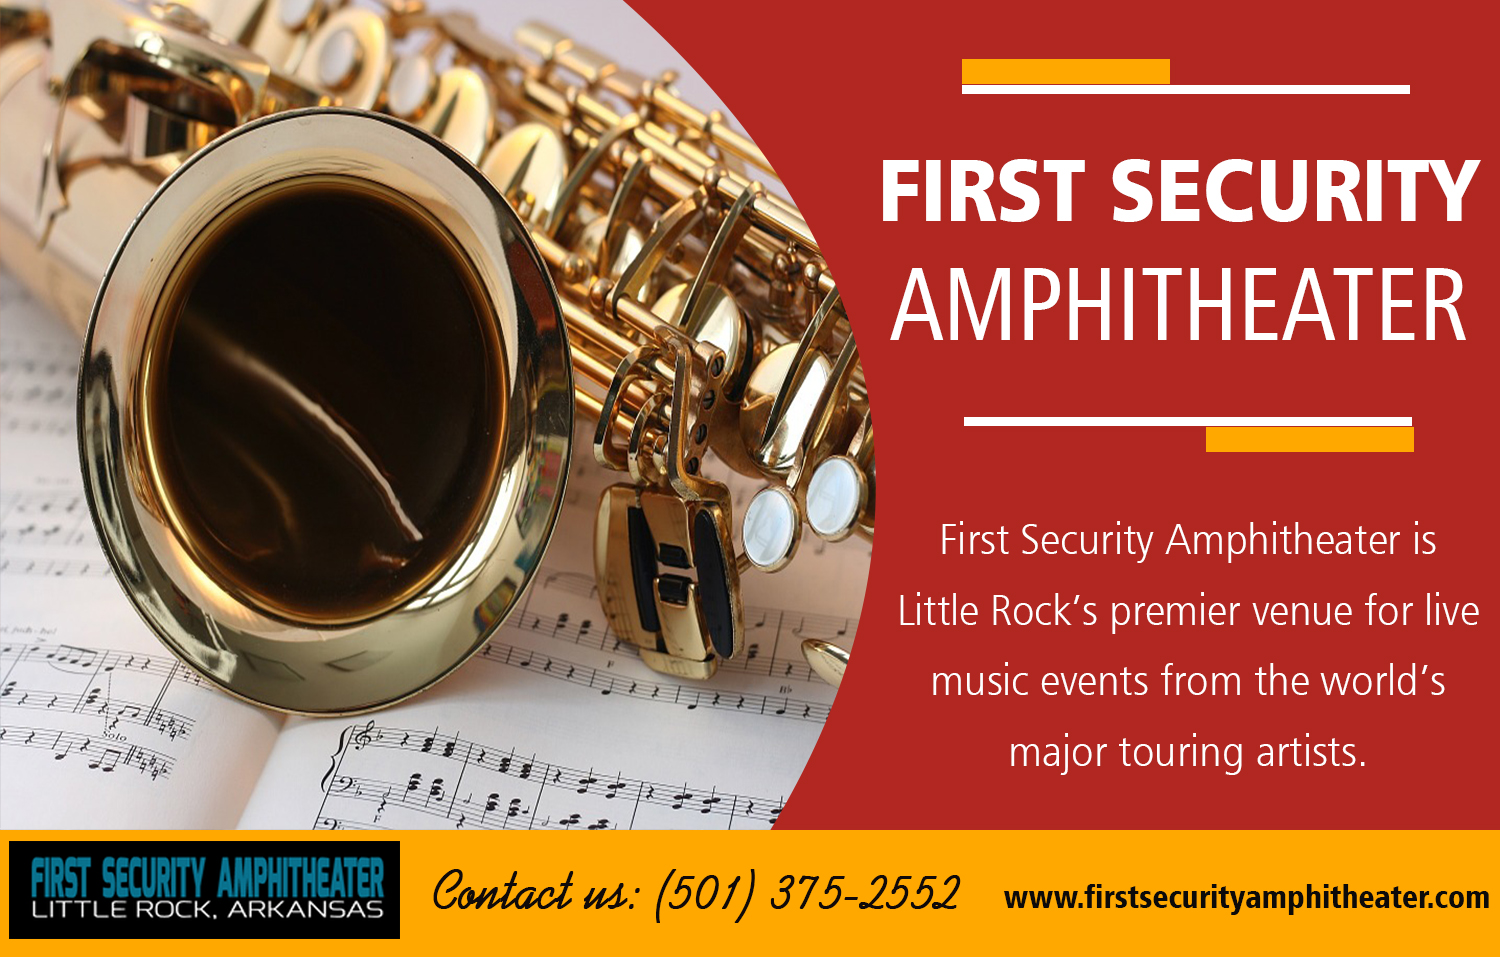 First Security Amphitheater Tickets